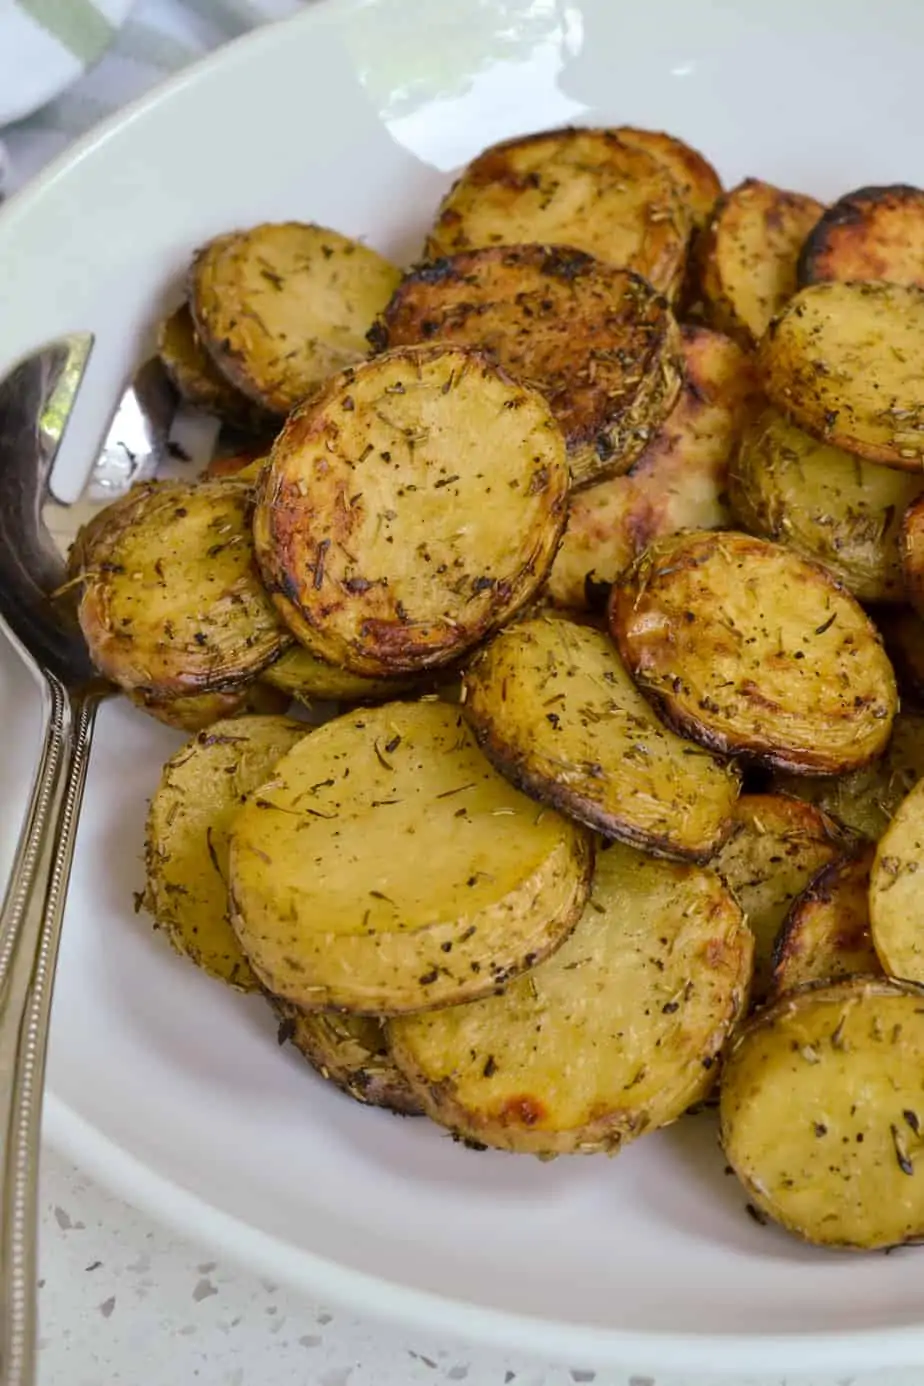 Easy and tasty Grilled Potatoes with herbs are cooked in a grill basket or aluminum foil right on top of your charcoal or gas grill.  They are the perfect side for all your summer grilling and barbecue recipes.